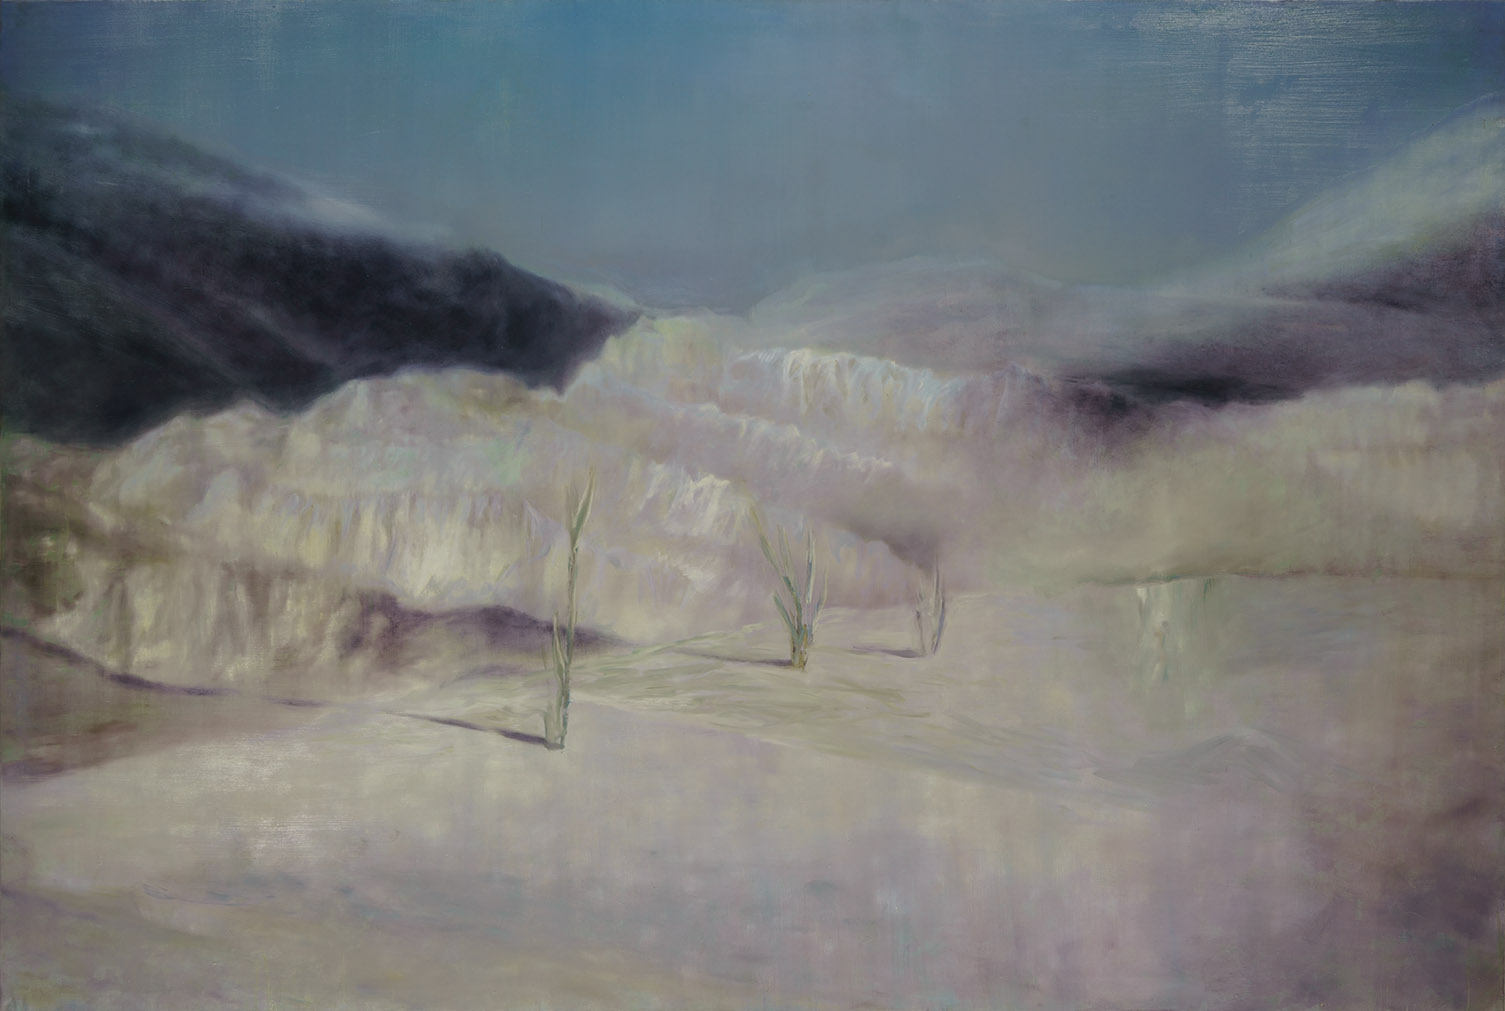 between mountains oil on canvas. 148x220cm 1994